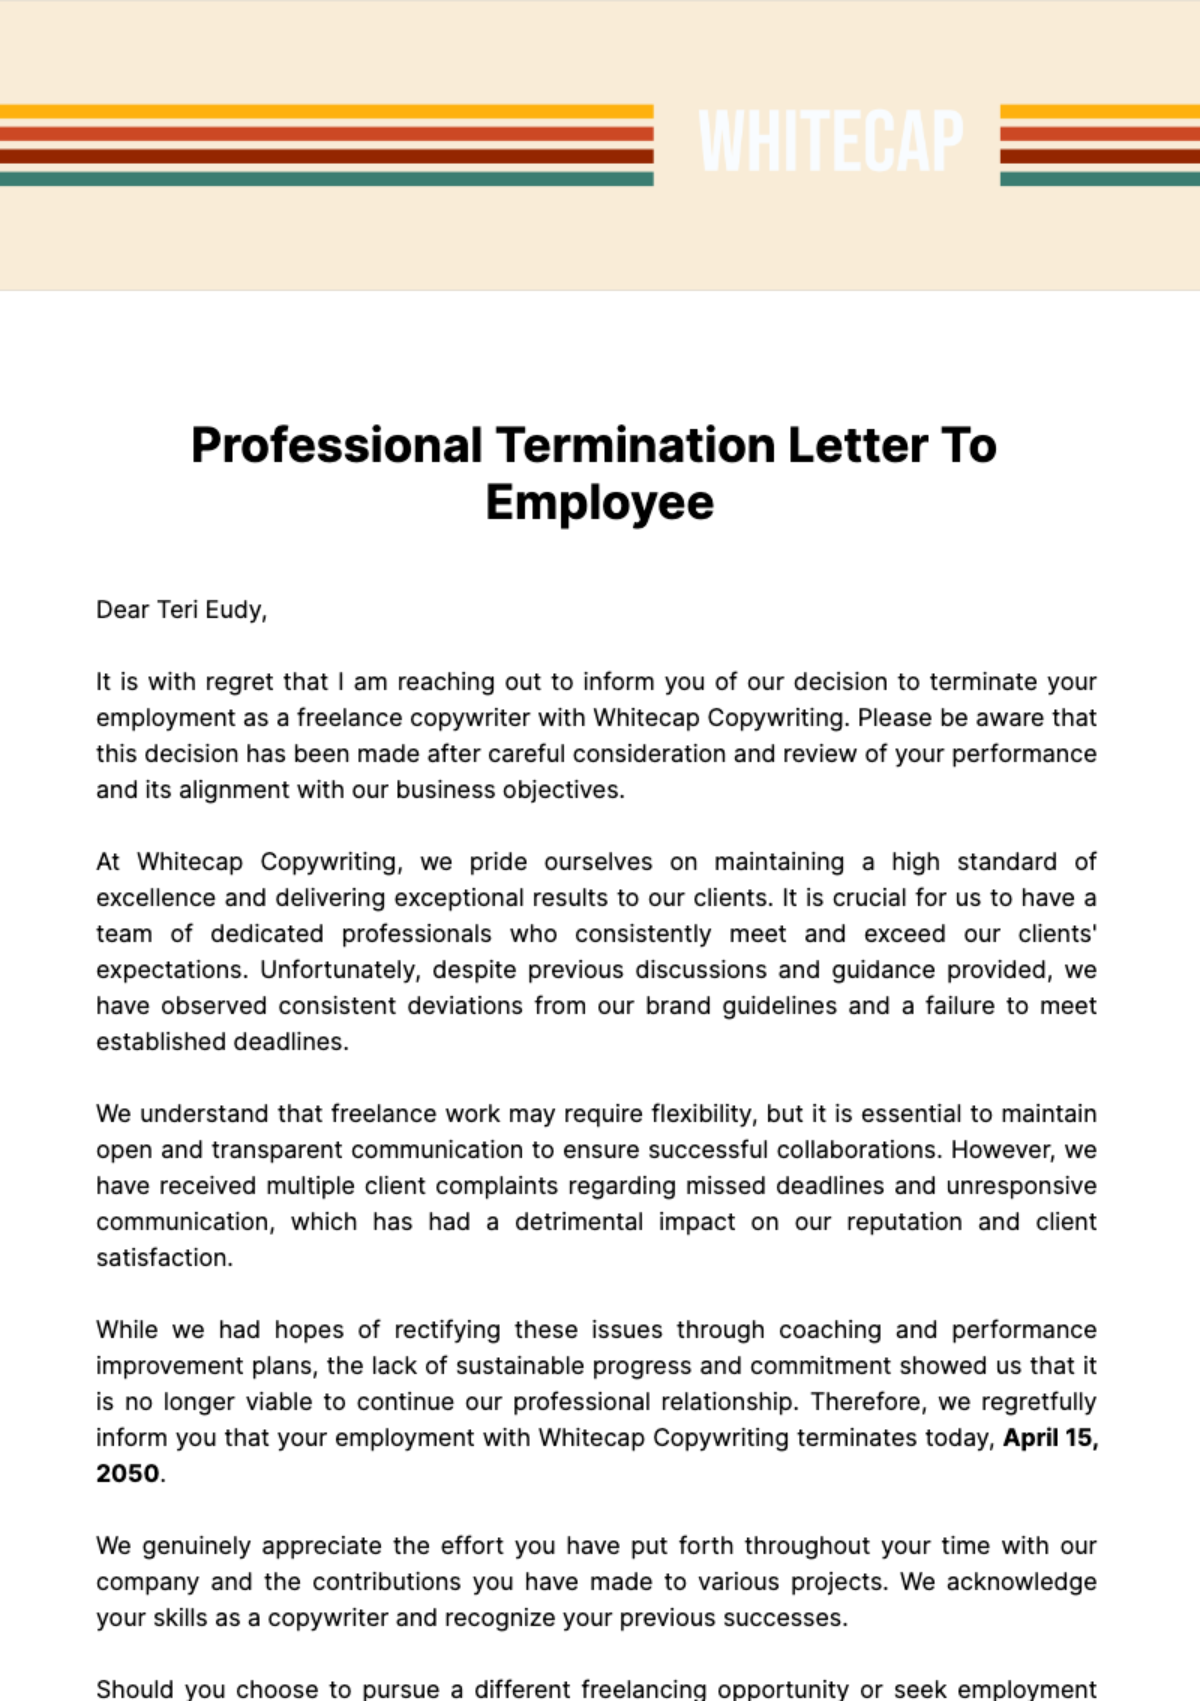 Professional Termination Letter to Employee Template